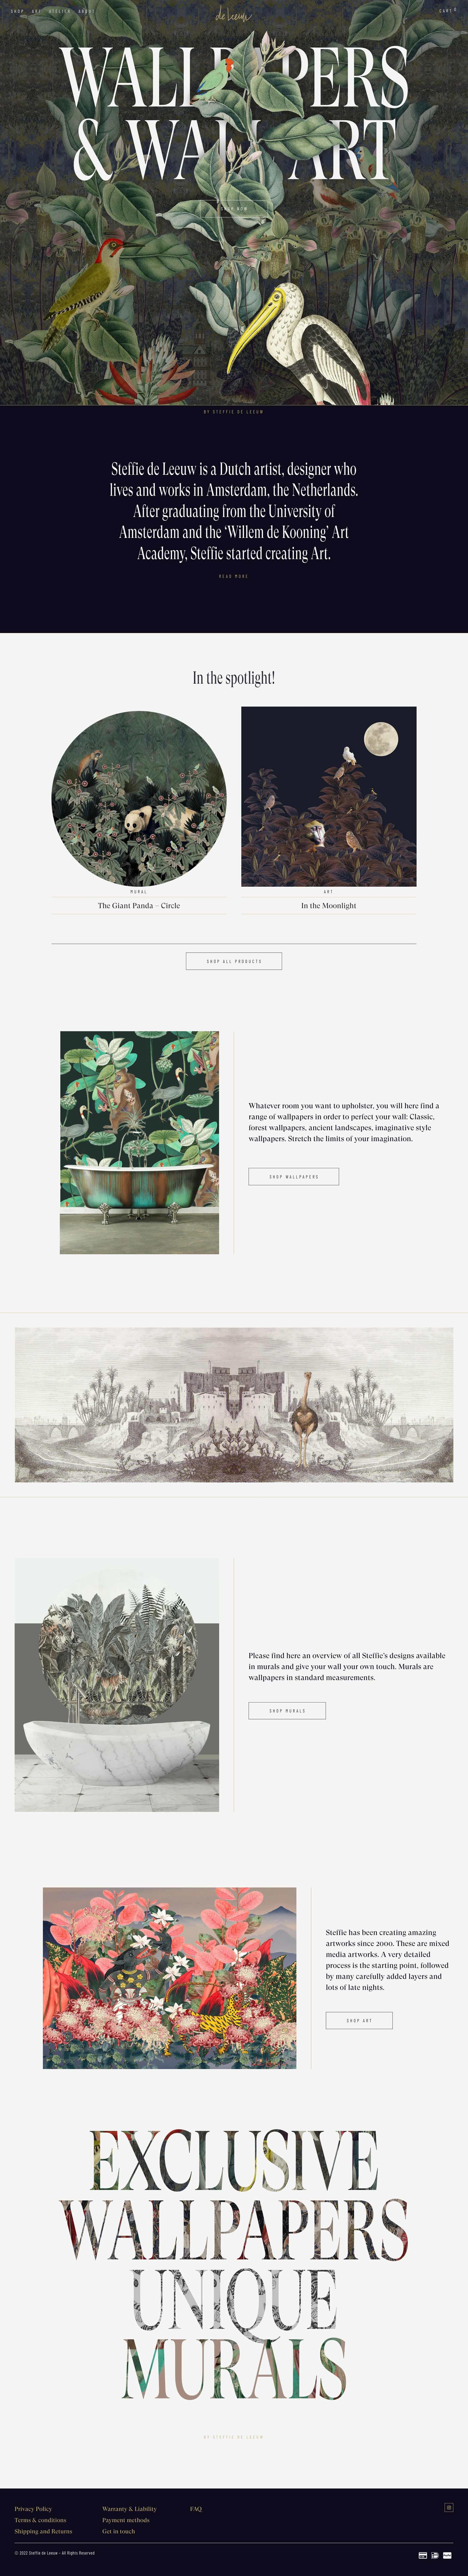 Steffie de Leeuw Landing Page Example: Welcome to Steffie de Leeuw’s website, greatly inspired by fine art, the great masters, and the unique beauty of nature.